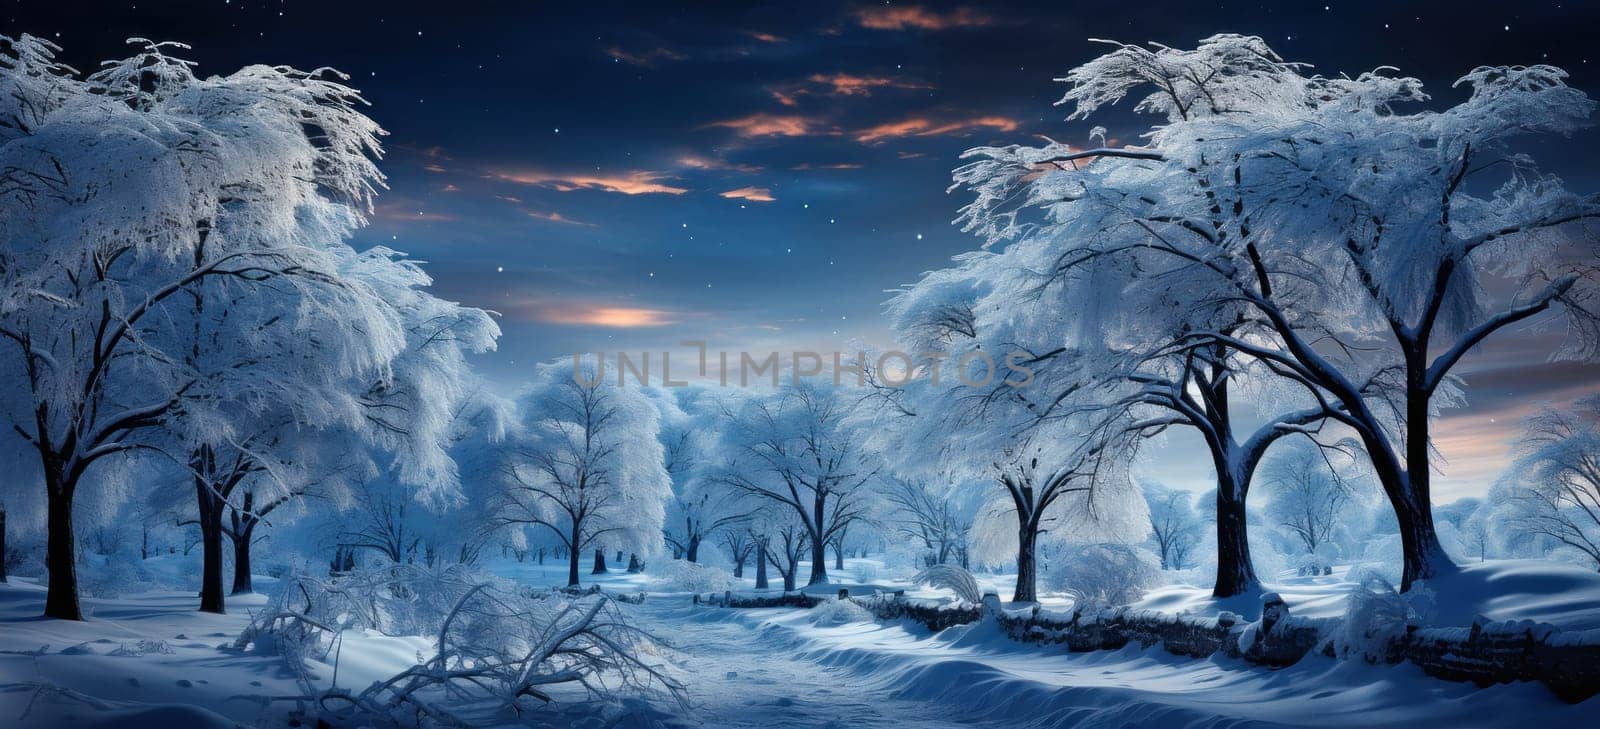 Twinkling stars illuminate the snow-covered trees in this dreamlike nightscape filled with magic and mystery.